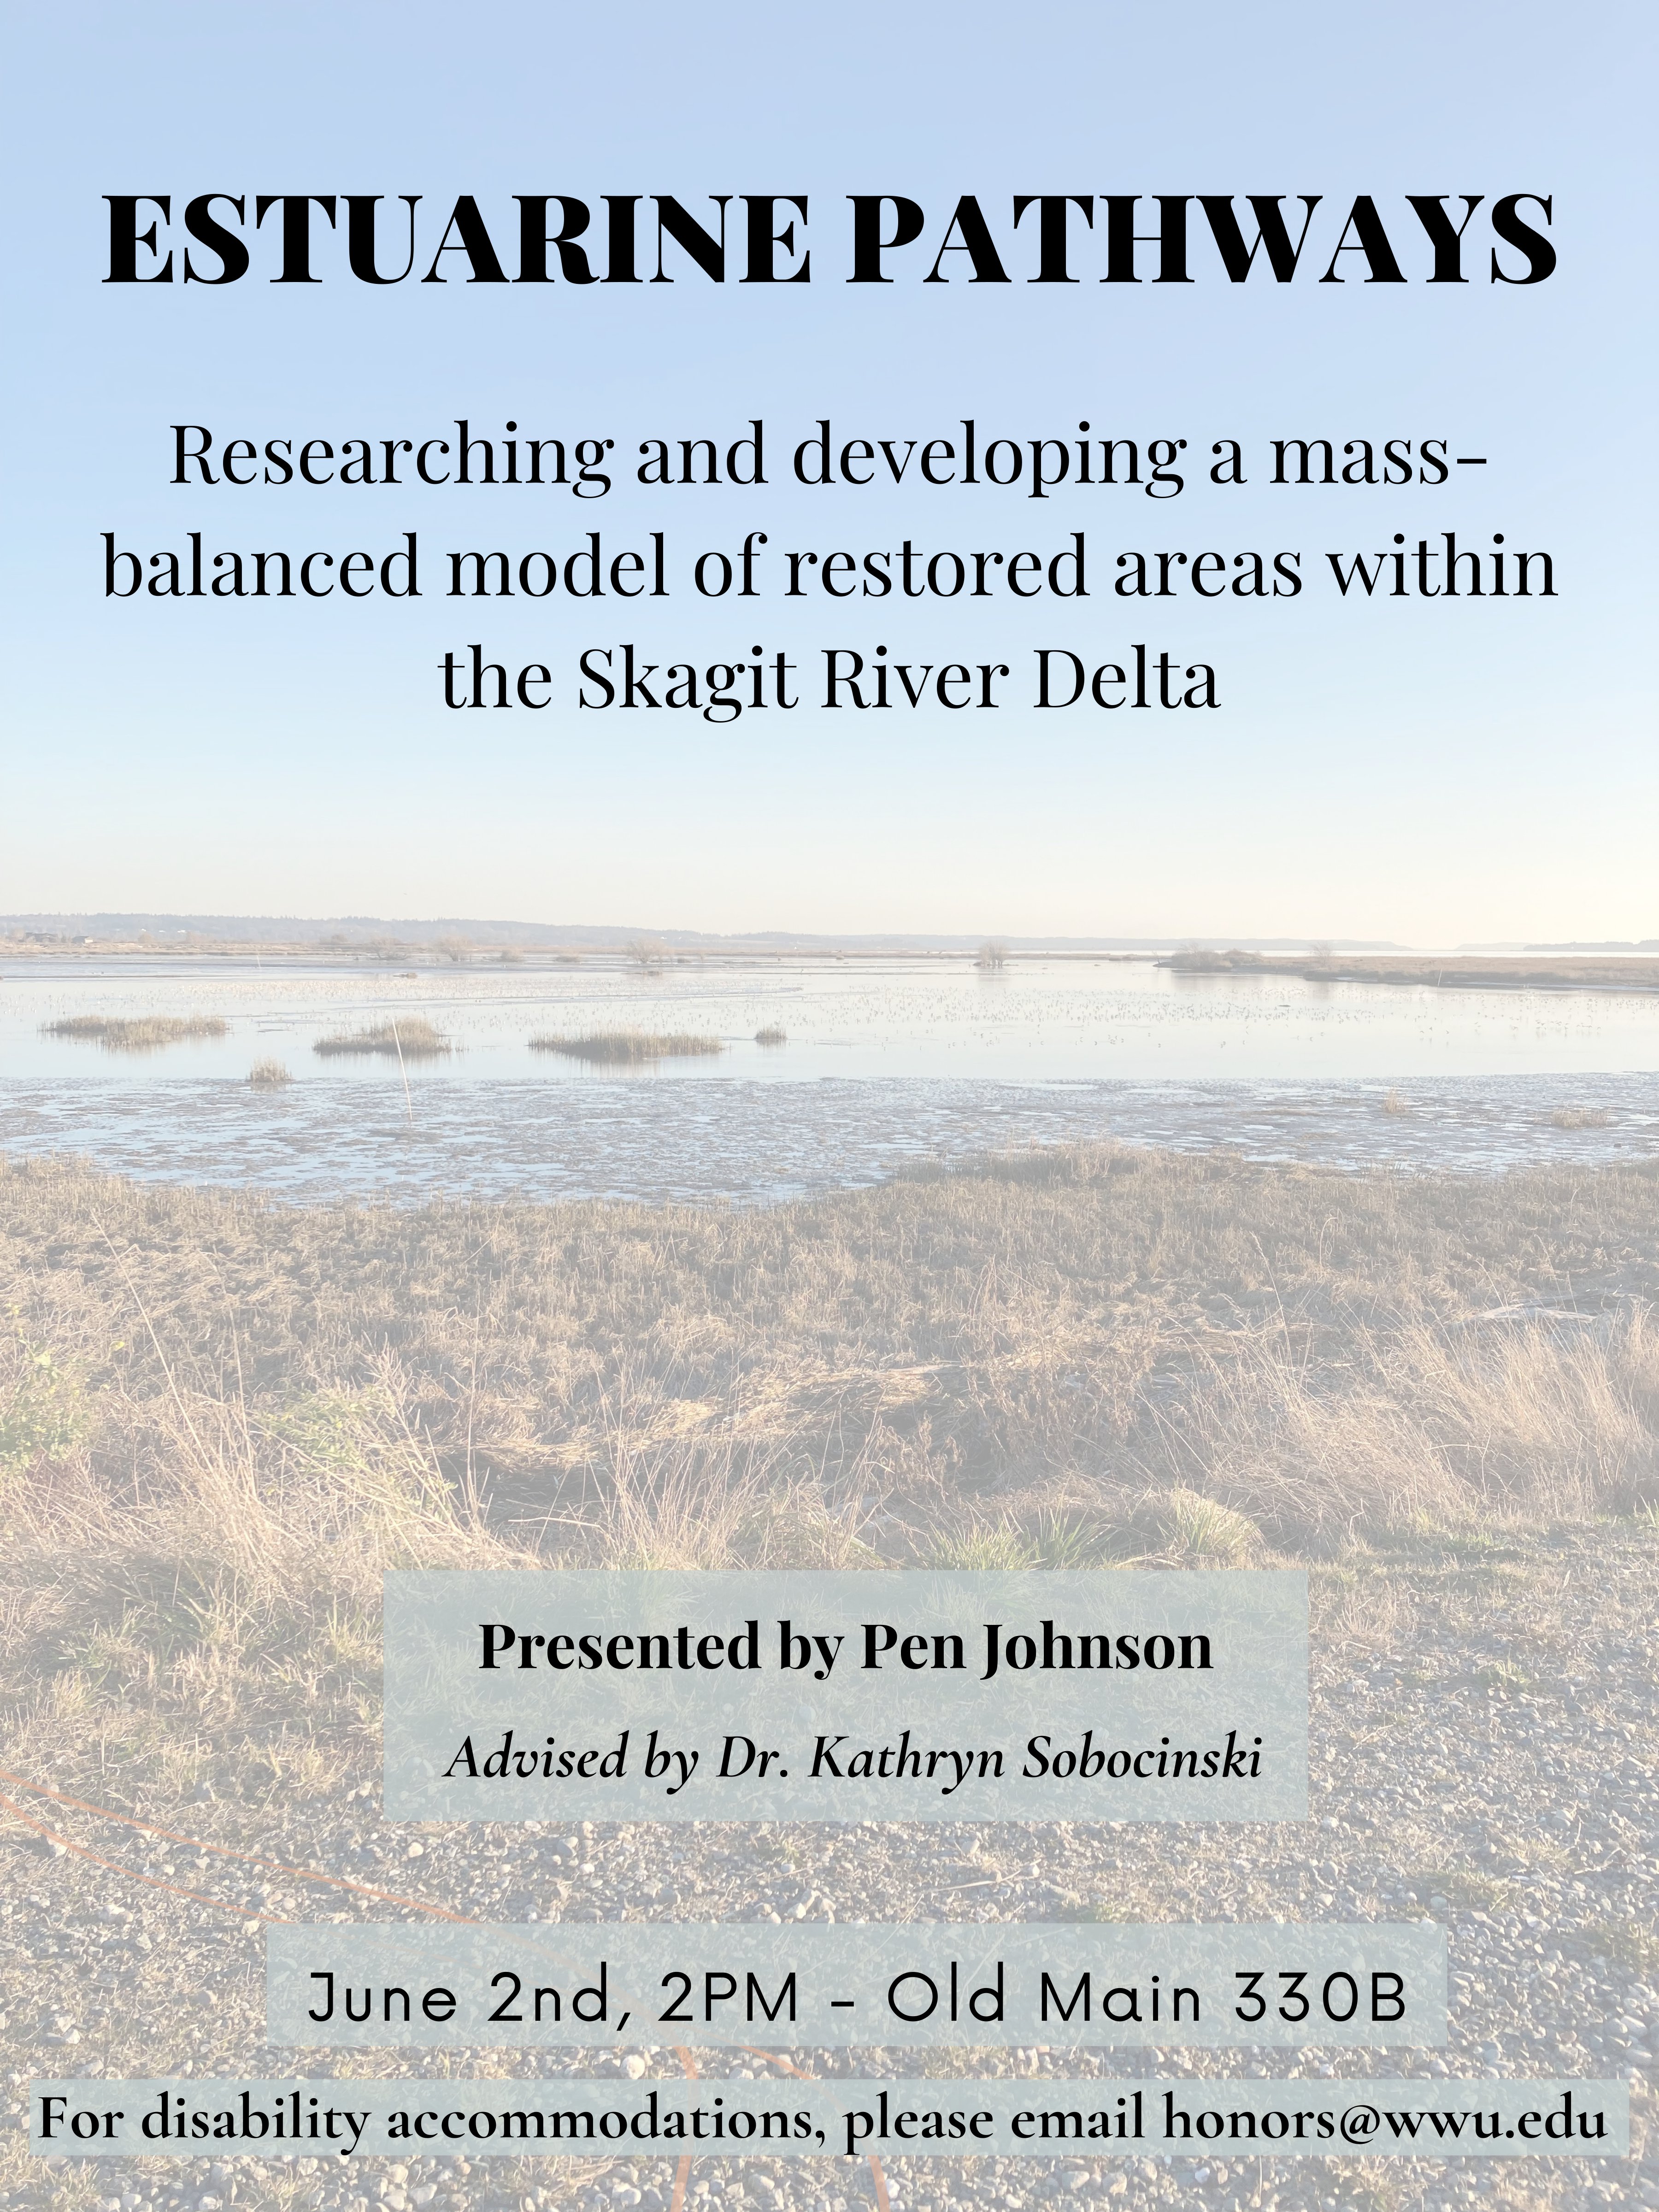 A poster with a background depicting a faded estuary. The text on the top center reads, “Estuarine Pathways, Researching and developing a mass-balanced model of restored areas within the Skagit River Delta”. Text on a grey rectangle on the bottom center reads, “Presented by Pen Johnson, Advised by Dr. Kathryn Sobocinski”. Underneath this text is a date and time “June 2nd, 2PM in Old Main 330B” followed by text that reads, “For disability accommodations, please email honors@wwu.edu”